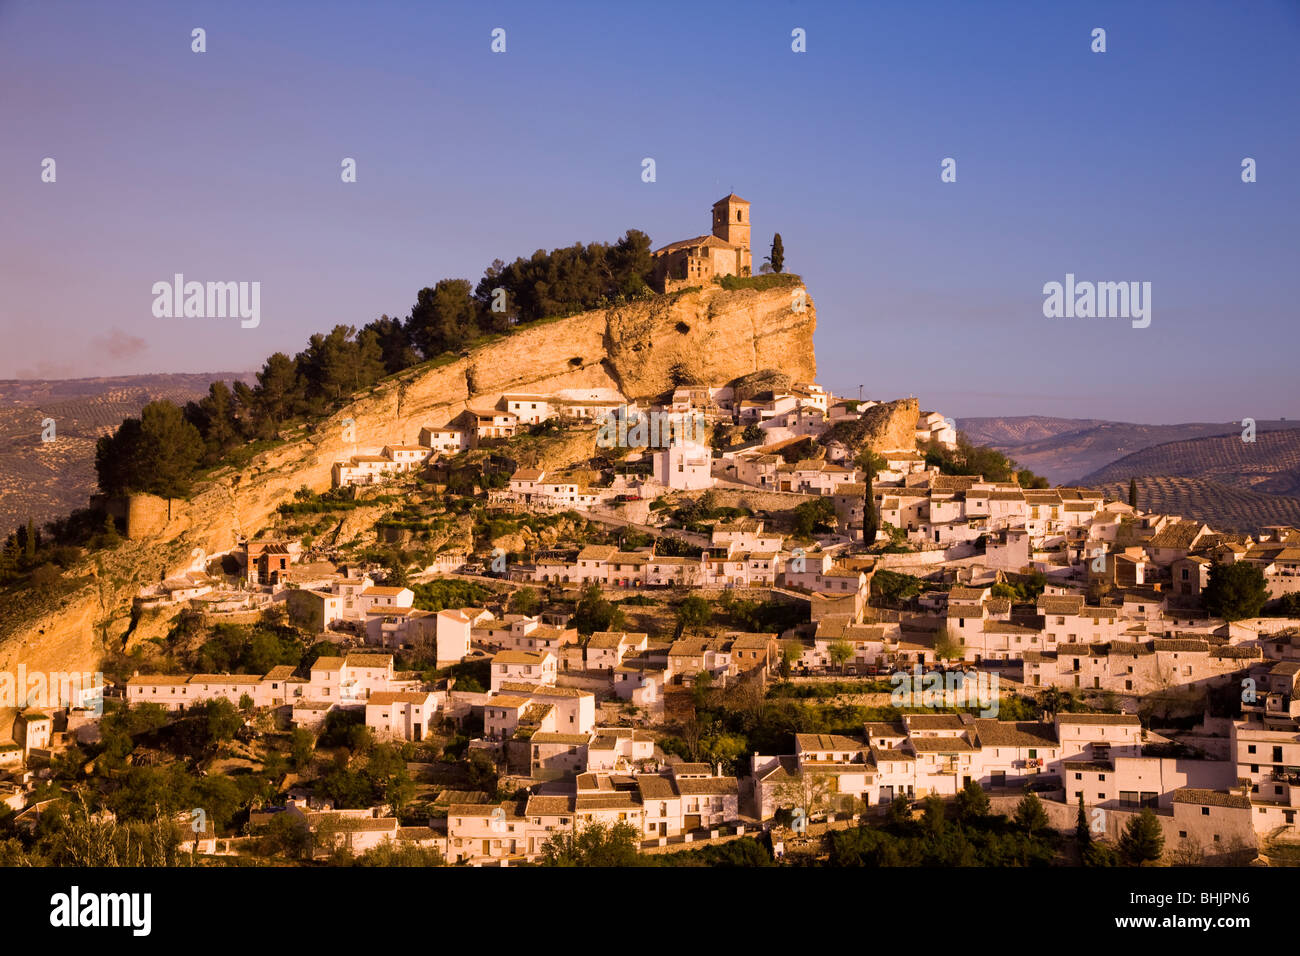 Spain Andalucia montefrio view over town in golden morning light Stock Photo